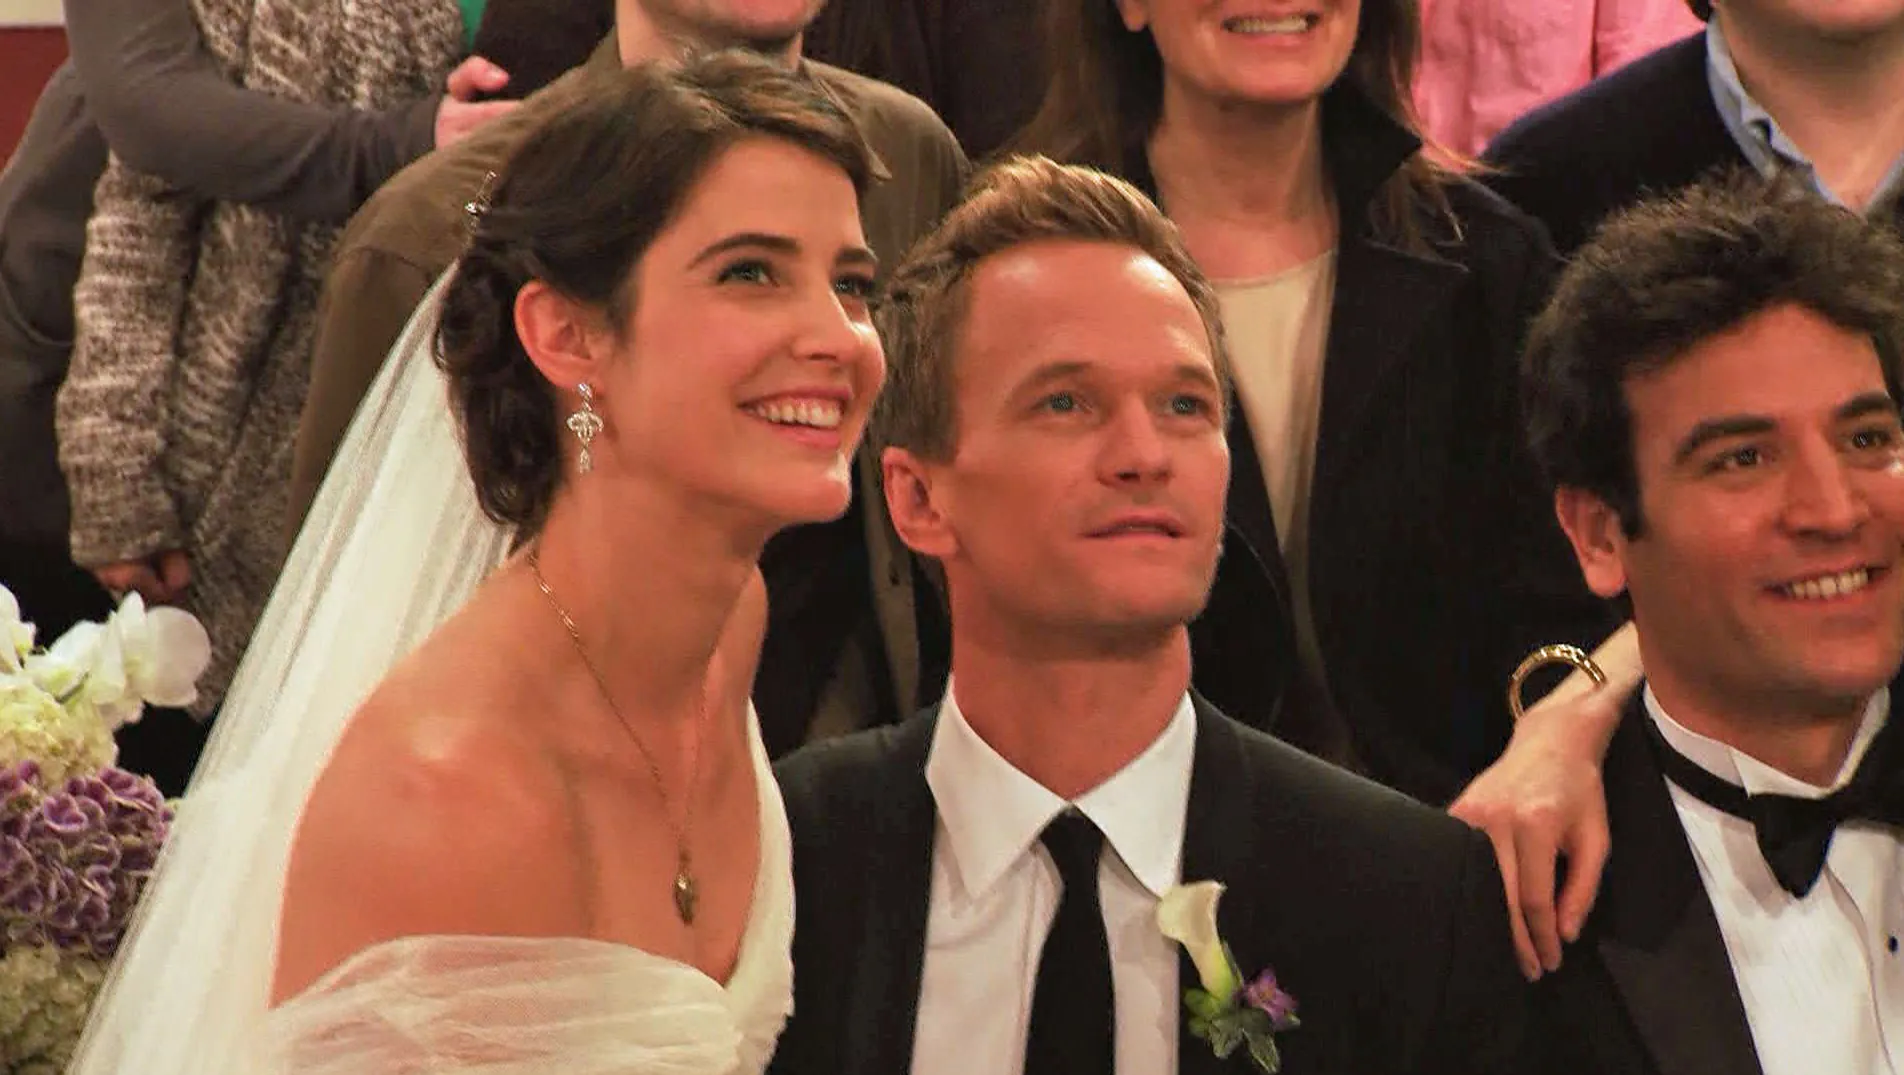 Robin and Barney's Wedding in How I Met Your Mother